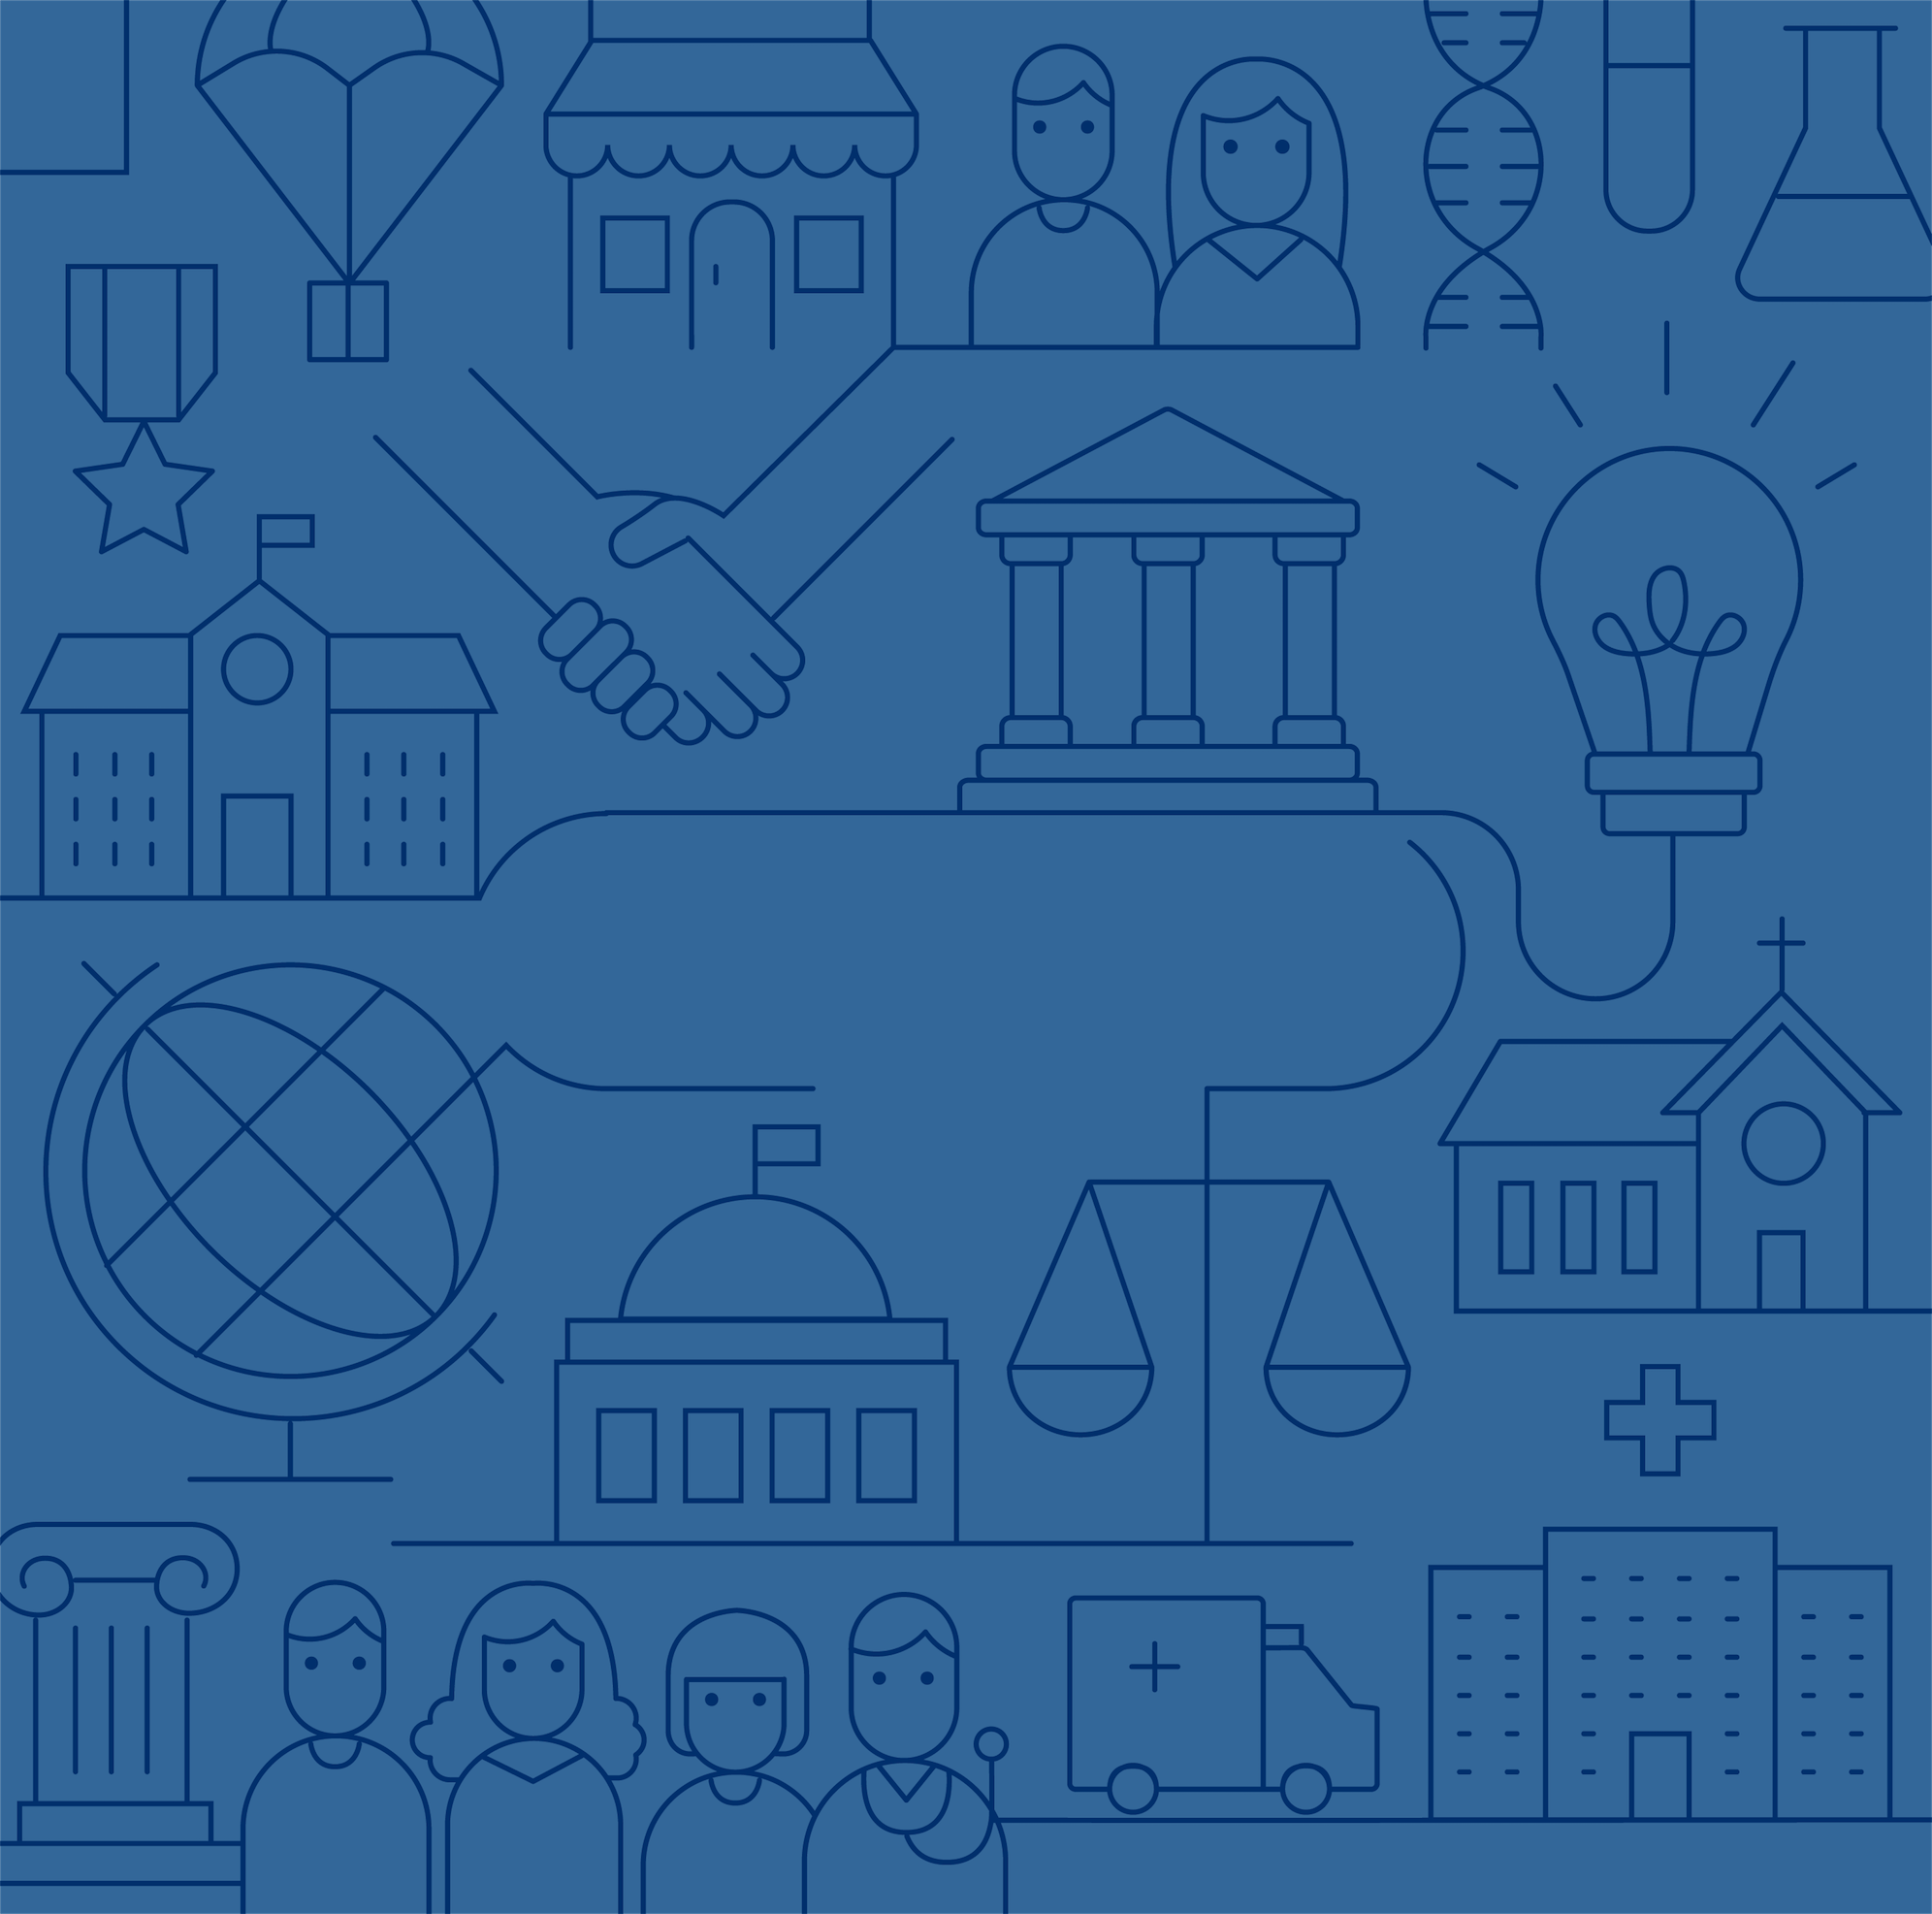 Graphic illustration representing partnership, with reference to partners such as NGOS, universities, U.S. government agencies, and faith-based organizations.